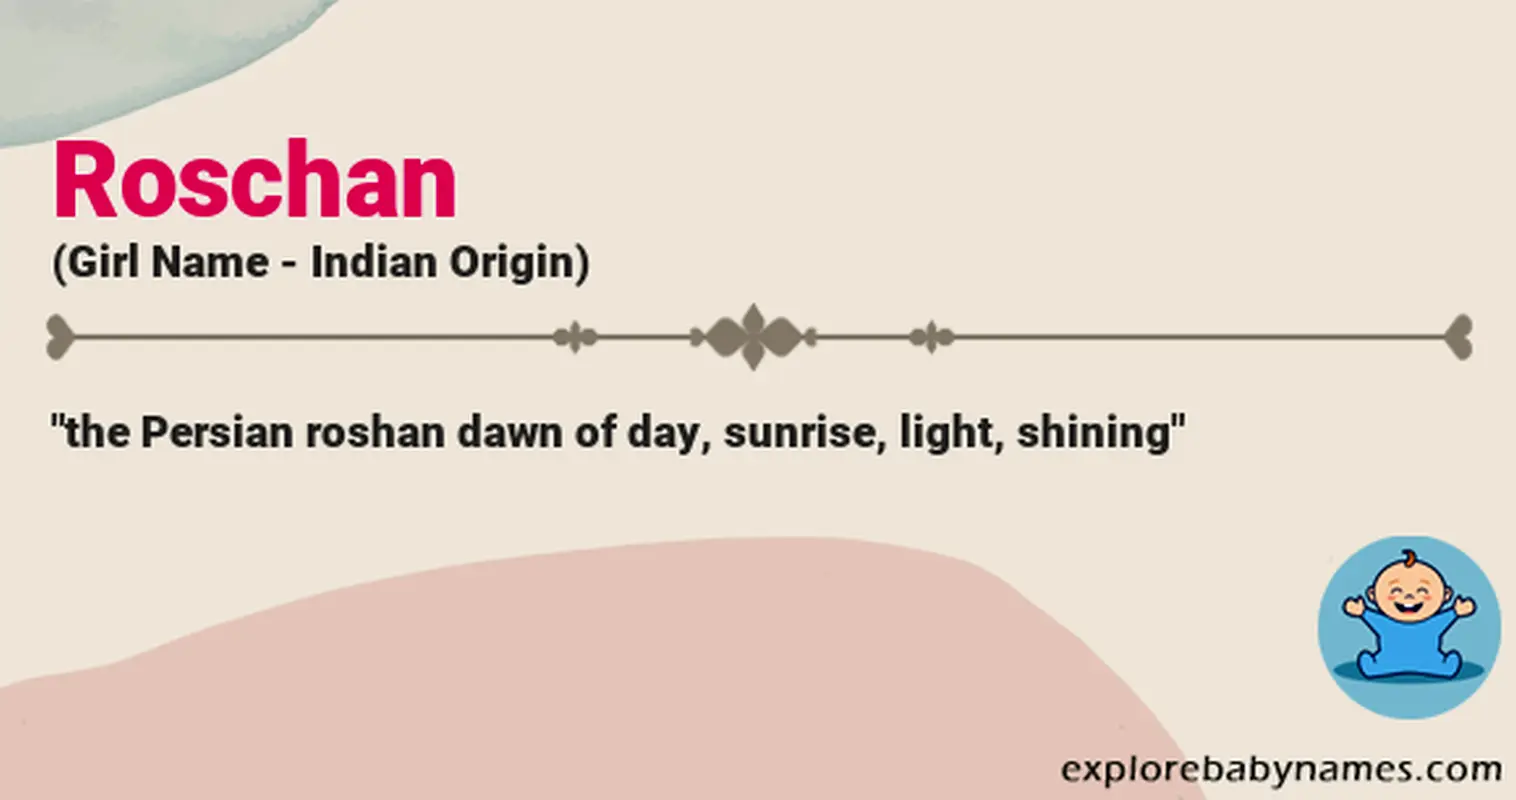 Meaning of Roschan